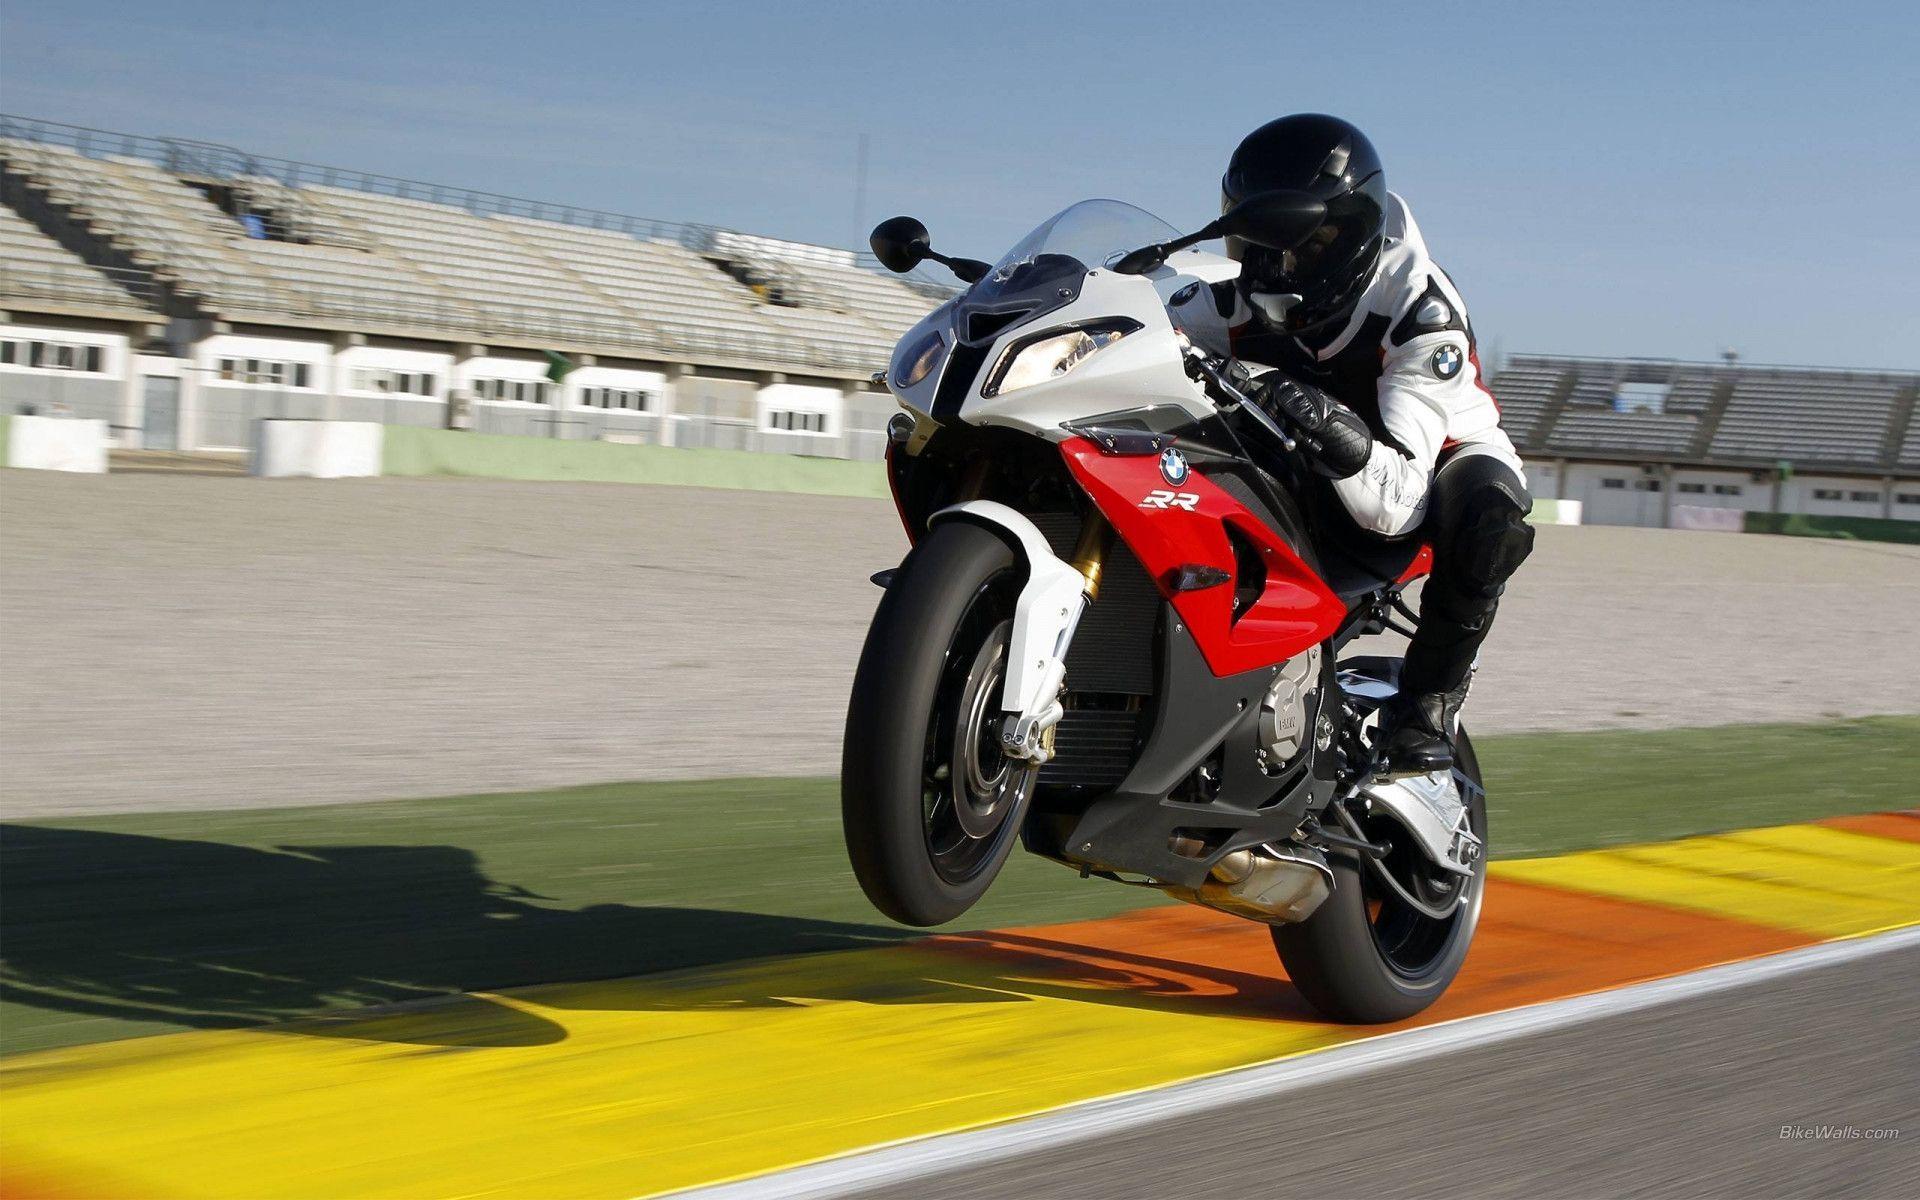 Bmw 2012 new s1000rr 11 photo image picture and wallpaper